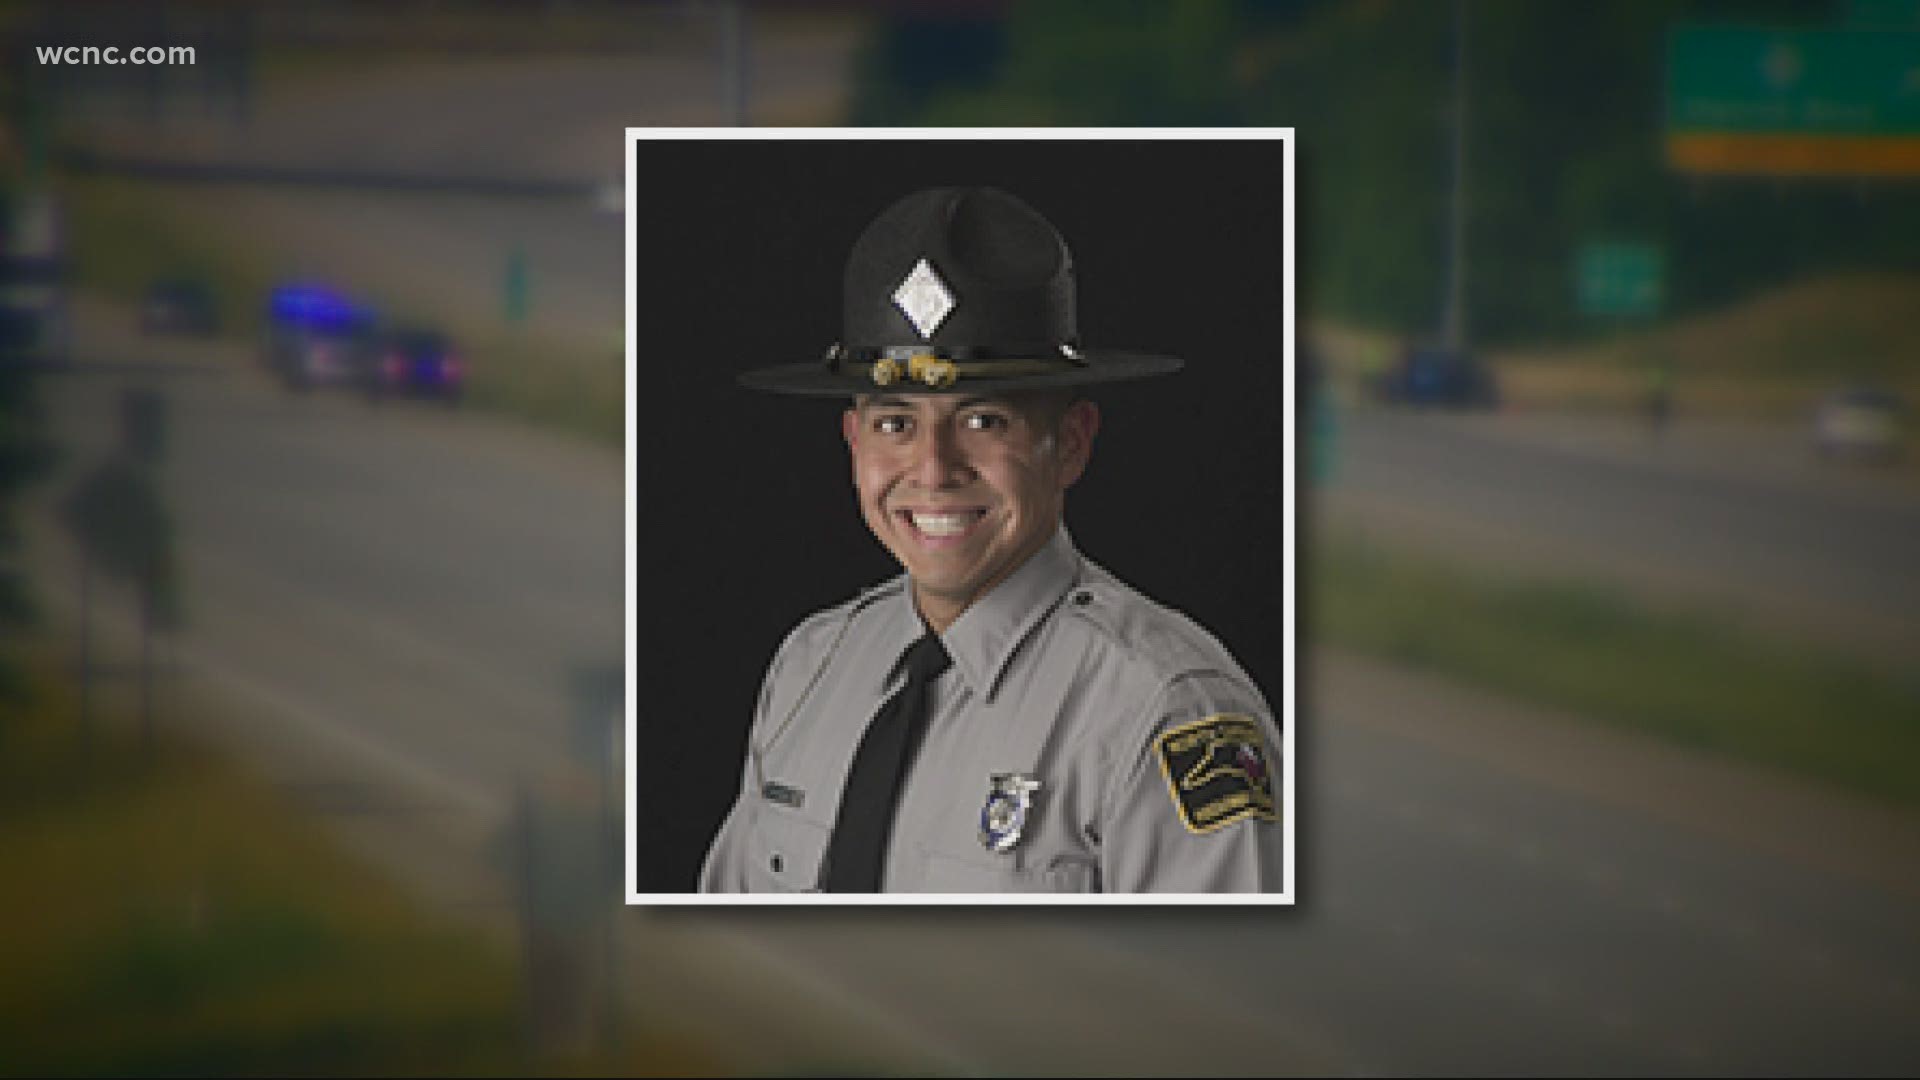 The North Carolina Highway Patrol trooper is being treated for life-threatening injuries. He was hit by a vehicle while investigating a crash from the night before.